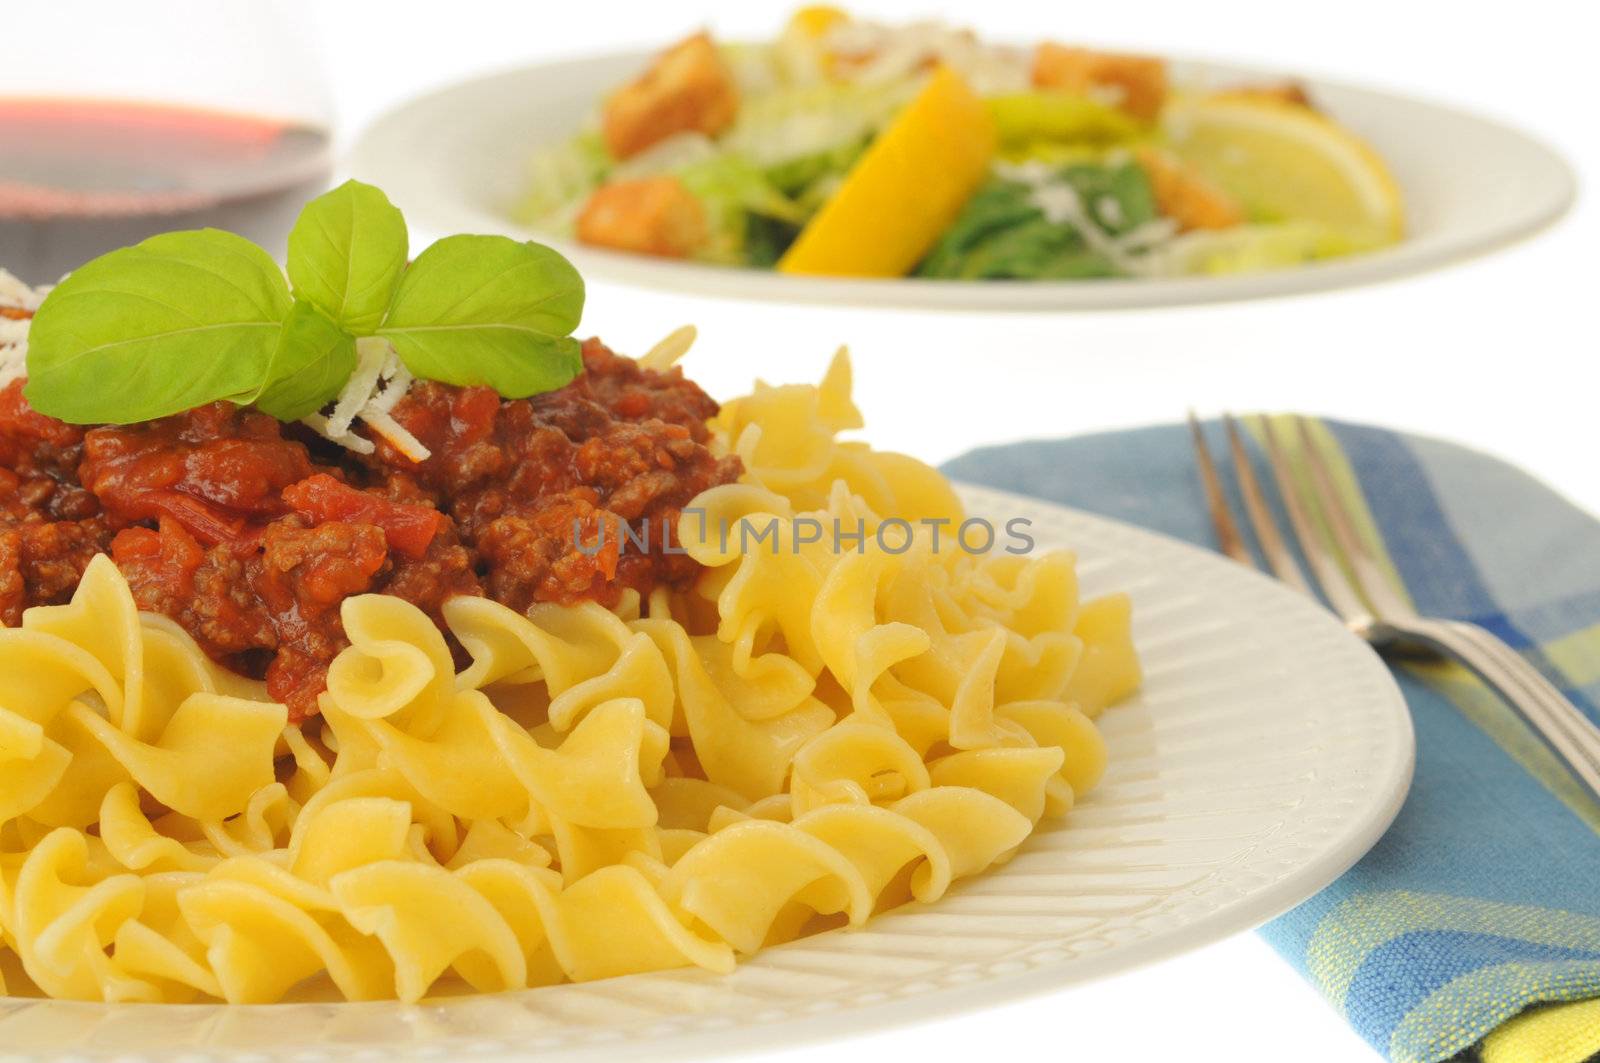 Pasta and Meat Sauce by billberryphotography